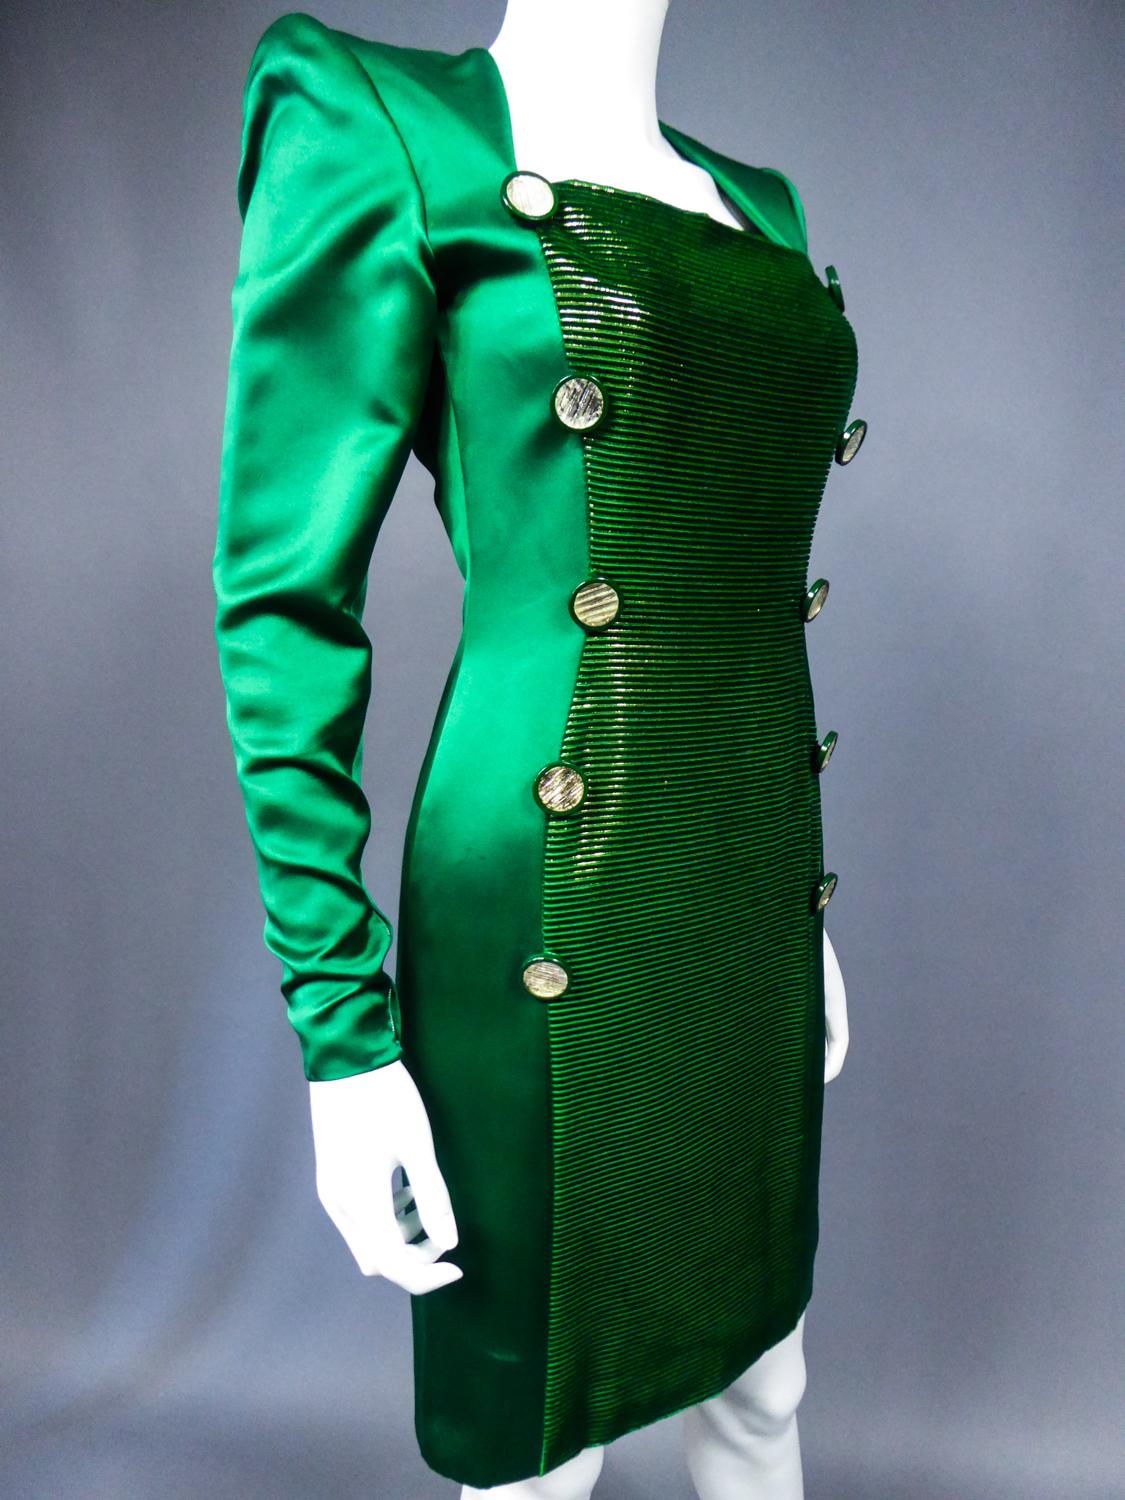 Circa 1985
France Haute Couture

A Hubert de Givenchy dress for show in emerald silk satin and gold lamé velvet dating from 1985/1990. Straight dress slightly skin-tight and long sleeves with huge shoulder-pads. Long dickey in ribbed velvet and lamé